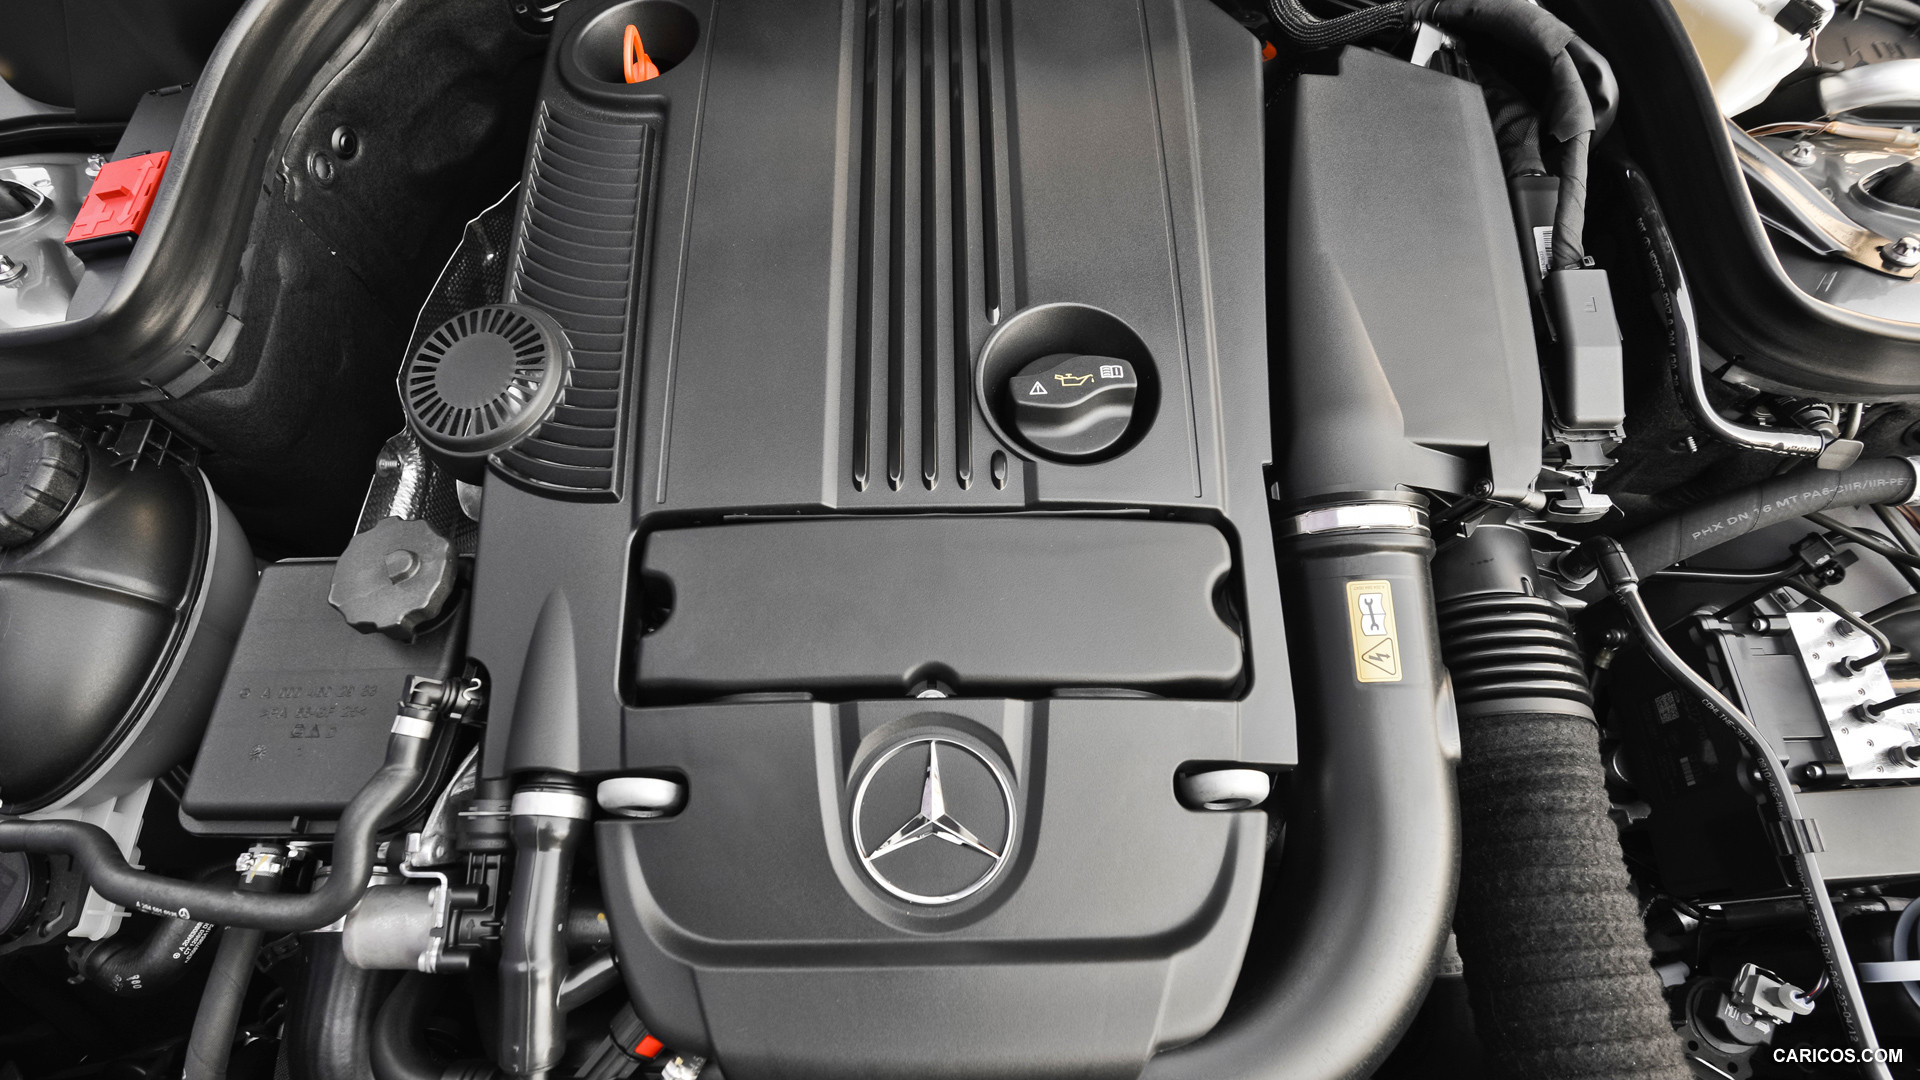 Mercedes-Benz C250 Coupe (2013)  - Engine, #85 of 86